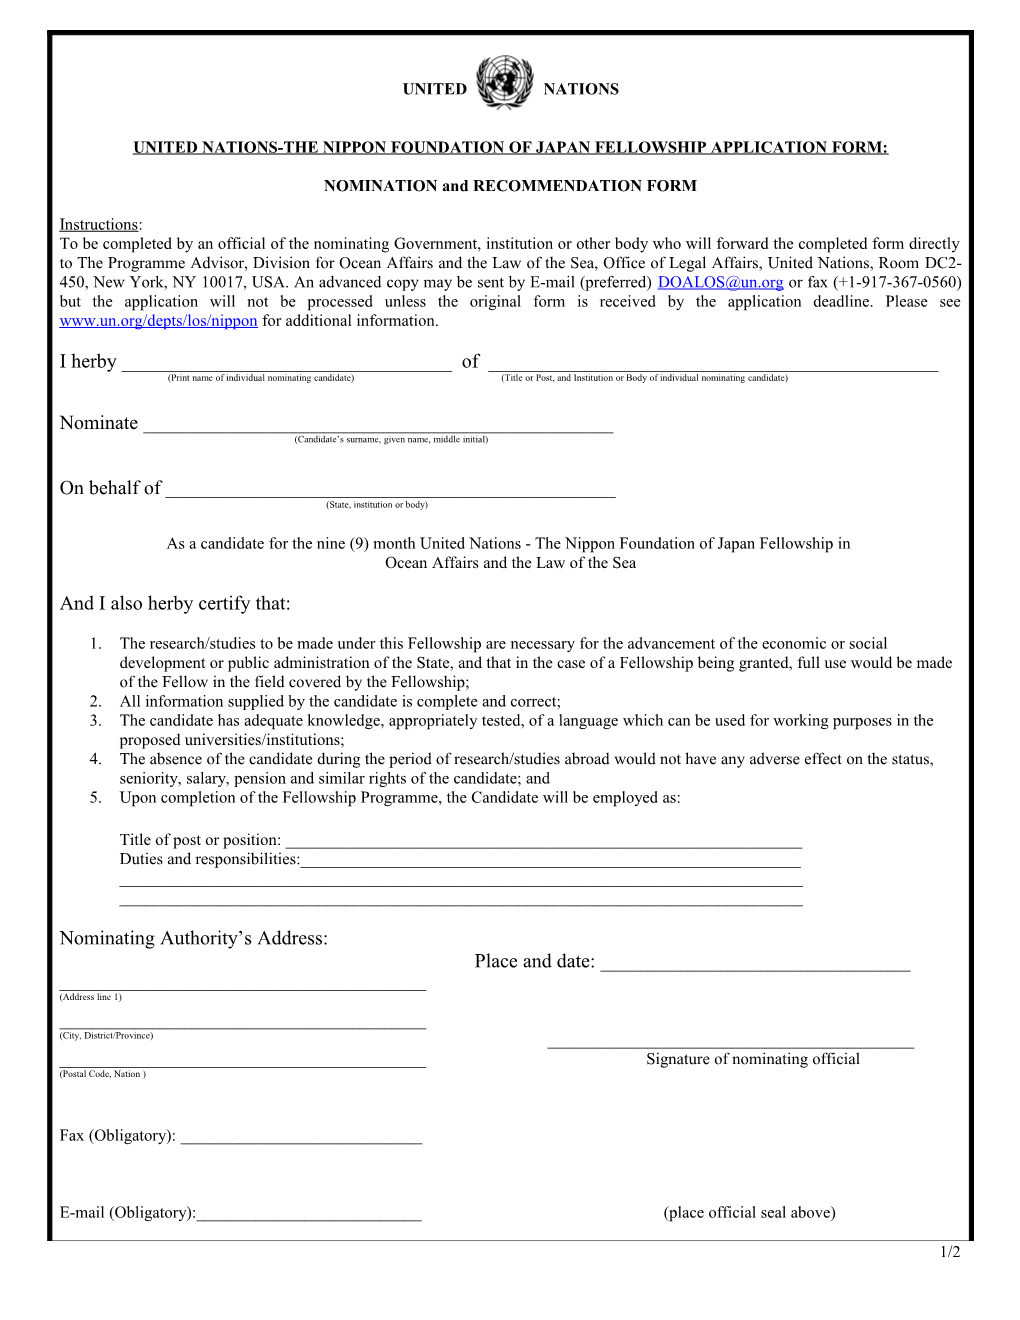 United Nations-The Nippon Foundation of Japan Fellowship Application Form